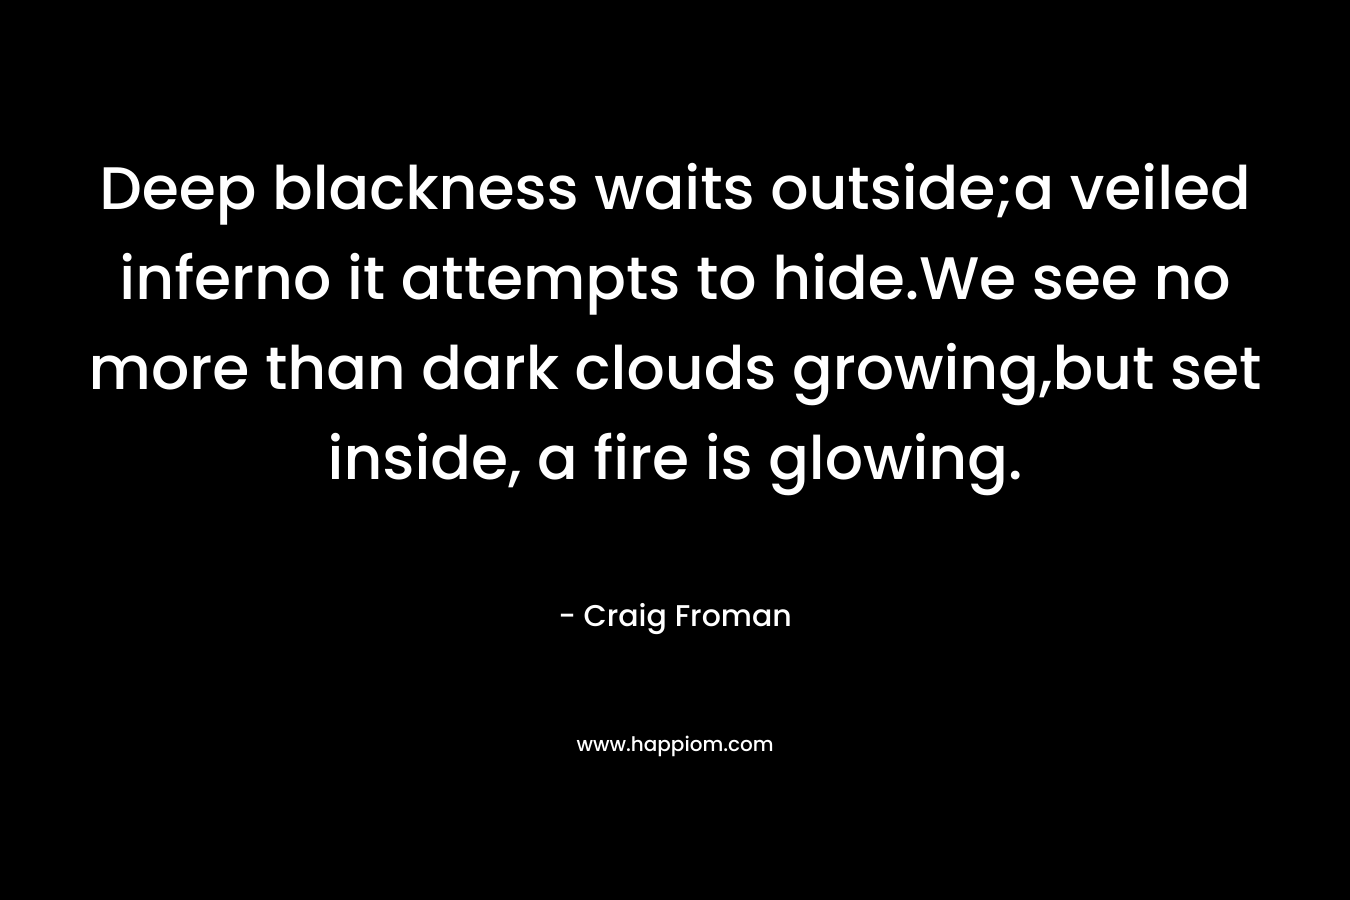 Deep blackness waits outside;a veiled inferno it attempts to hide.We see no more than dark clouds growing,but set inside, a fire is glowing.